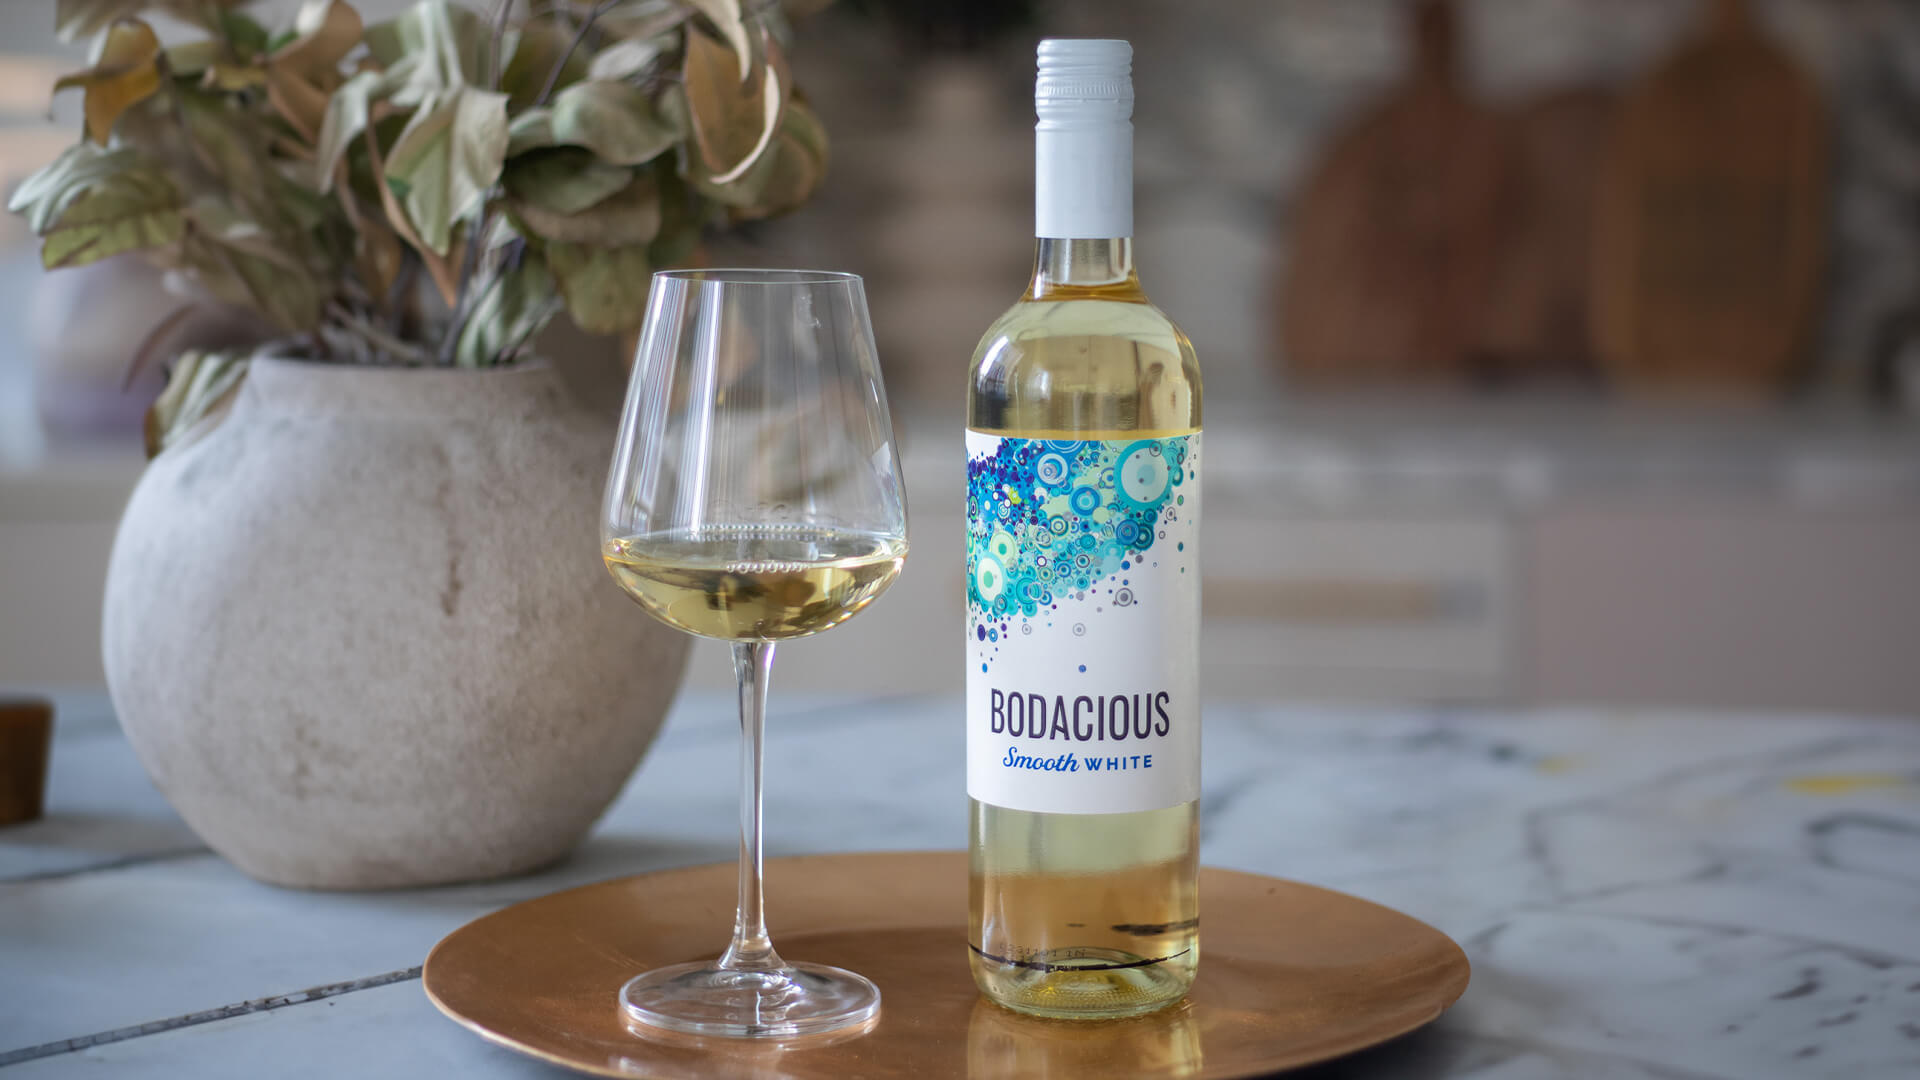 A bottle of Bodacious Smooth White.